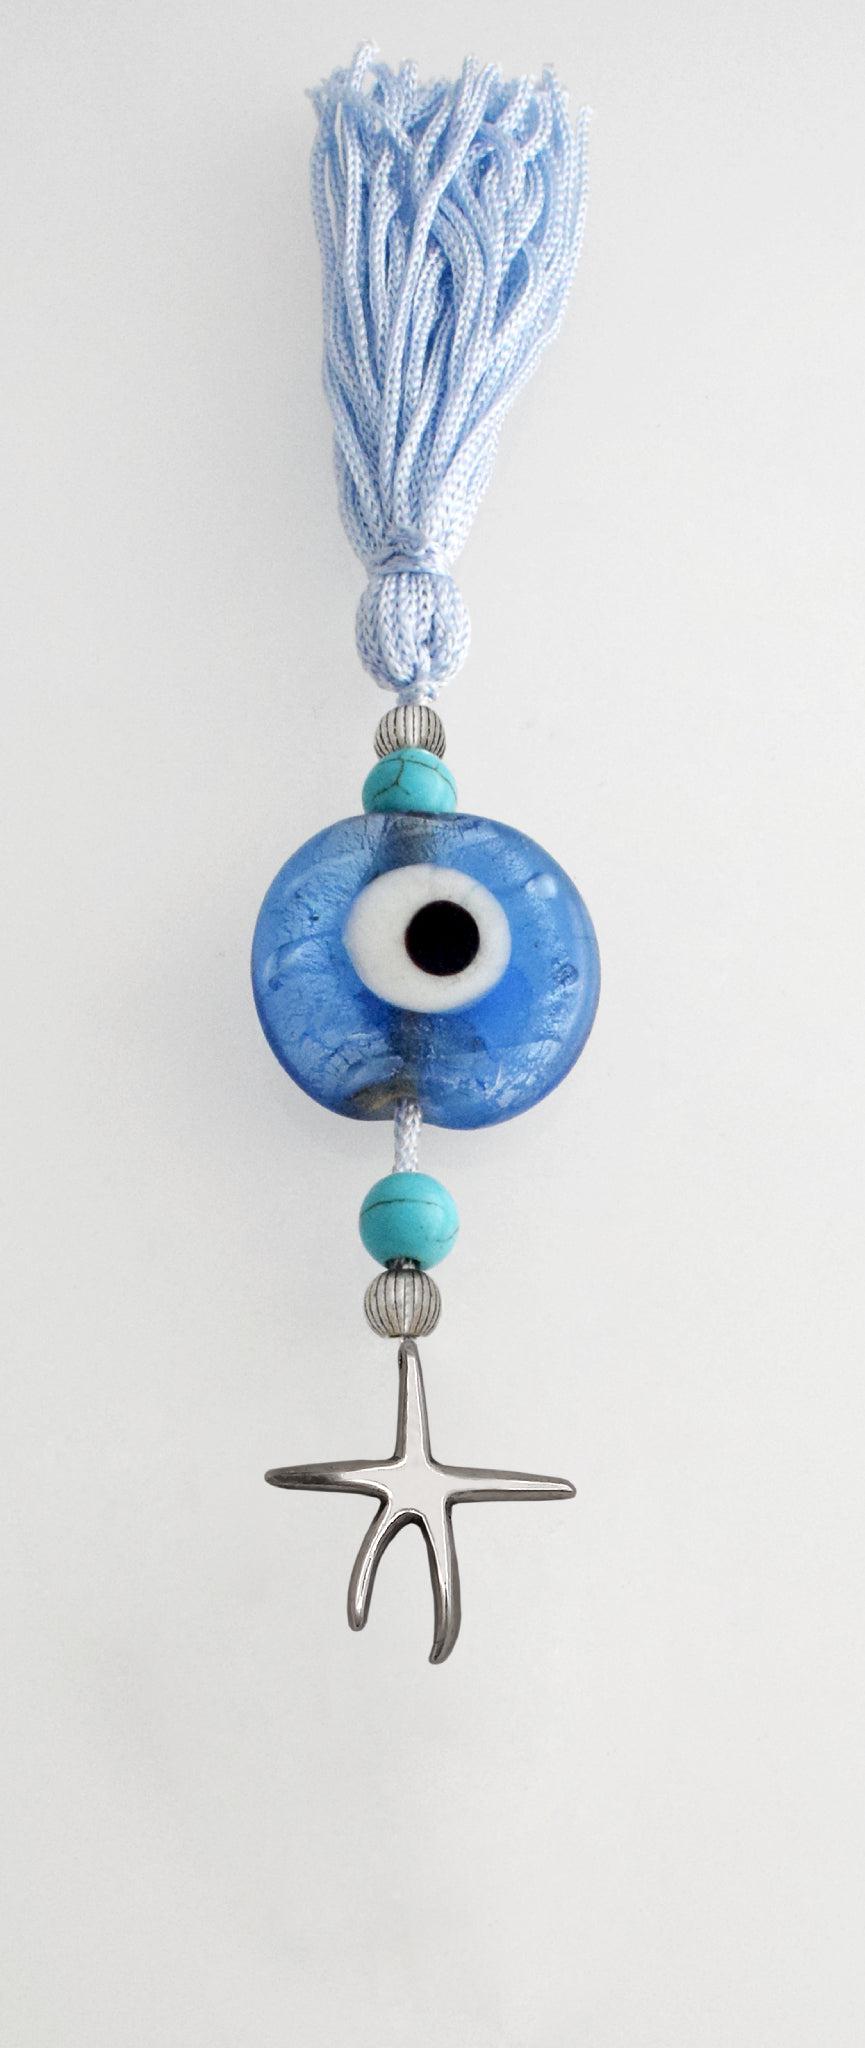 Evil Eye Charm on a tassel, House decoration, holiday decor, welcome gift, silver charm, Star Charm - ELEFTHERIOU EL